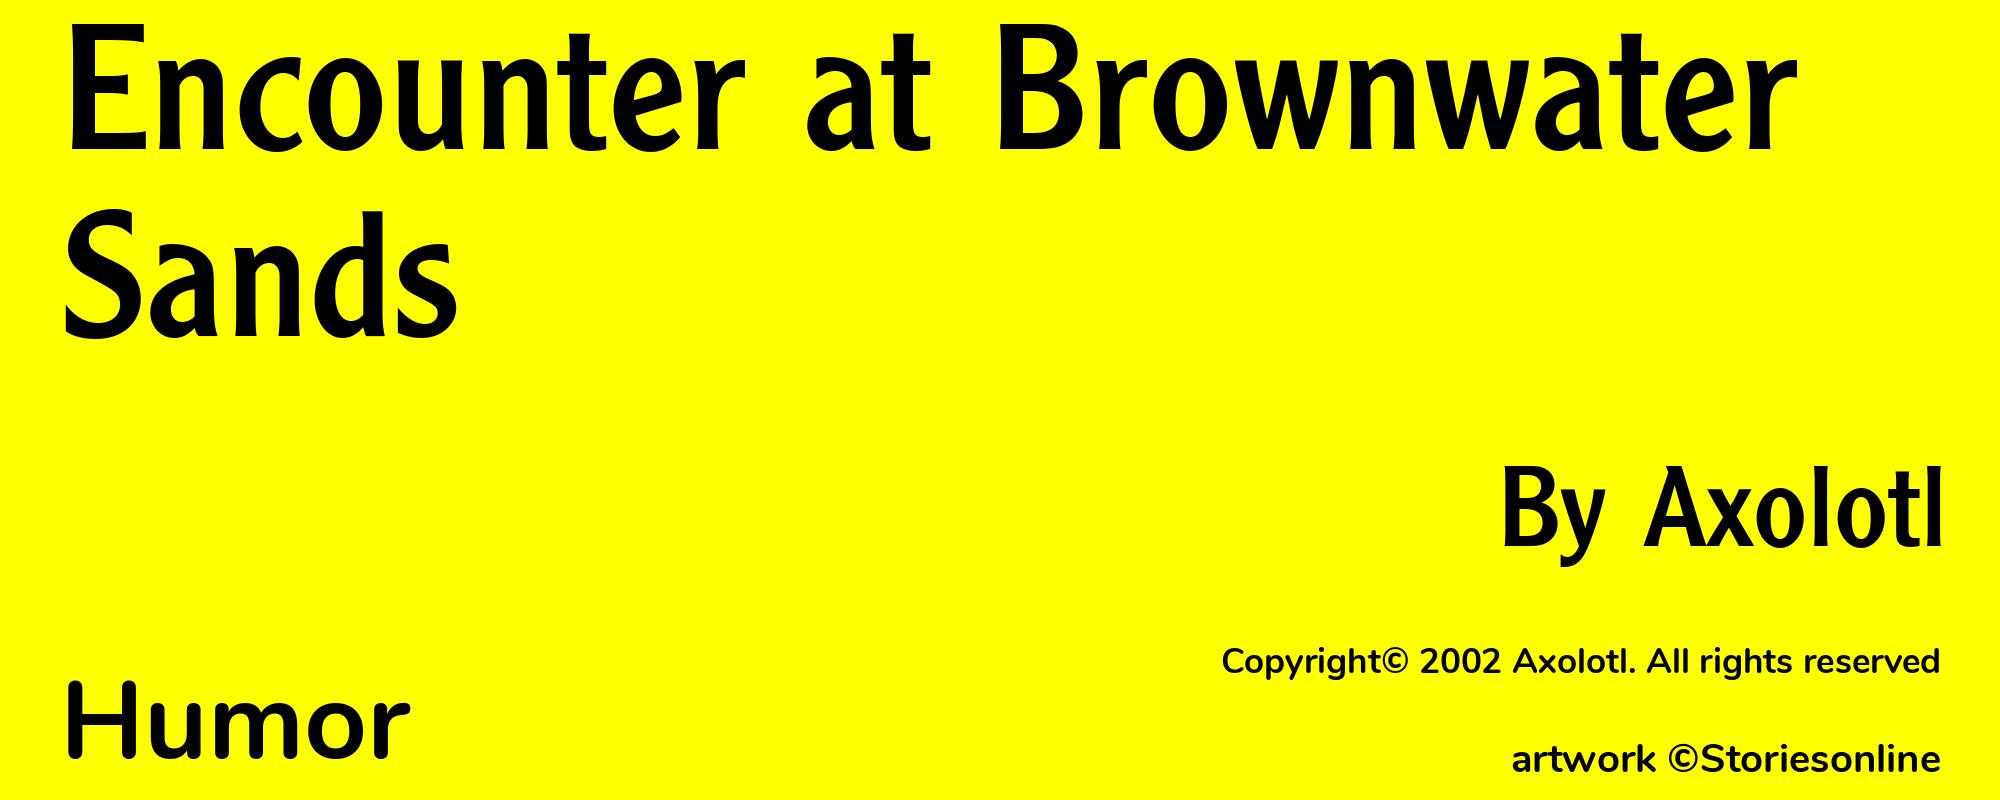 Encounter at Brownwater Sands - Cover